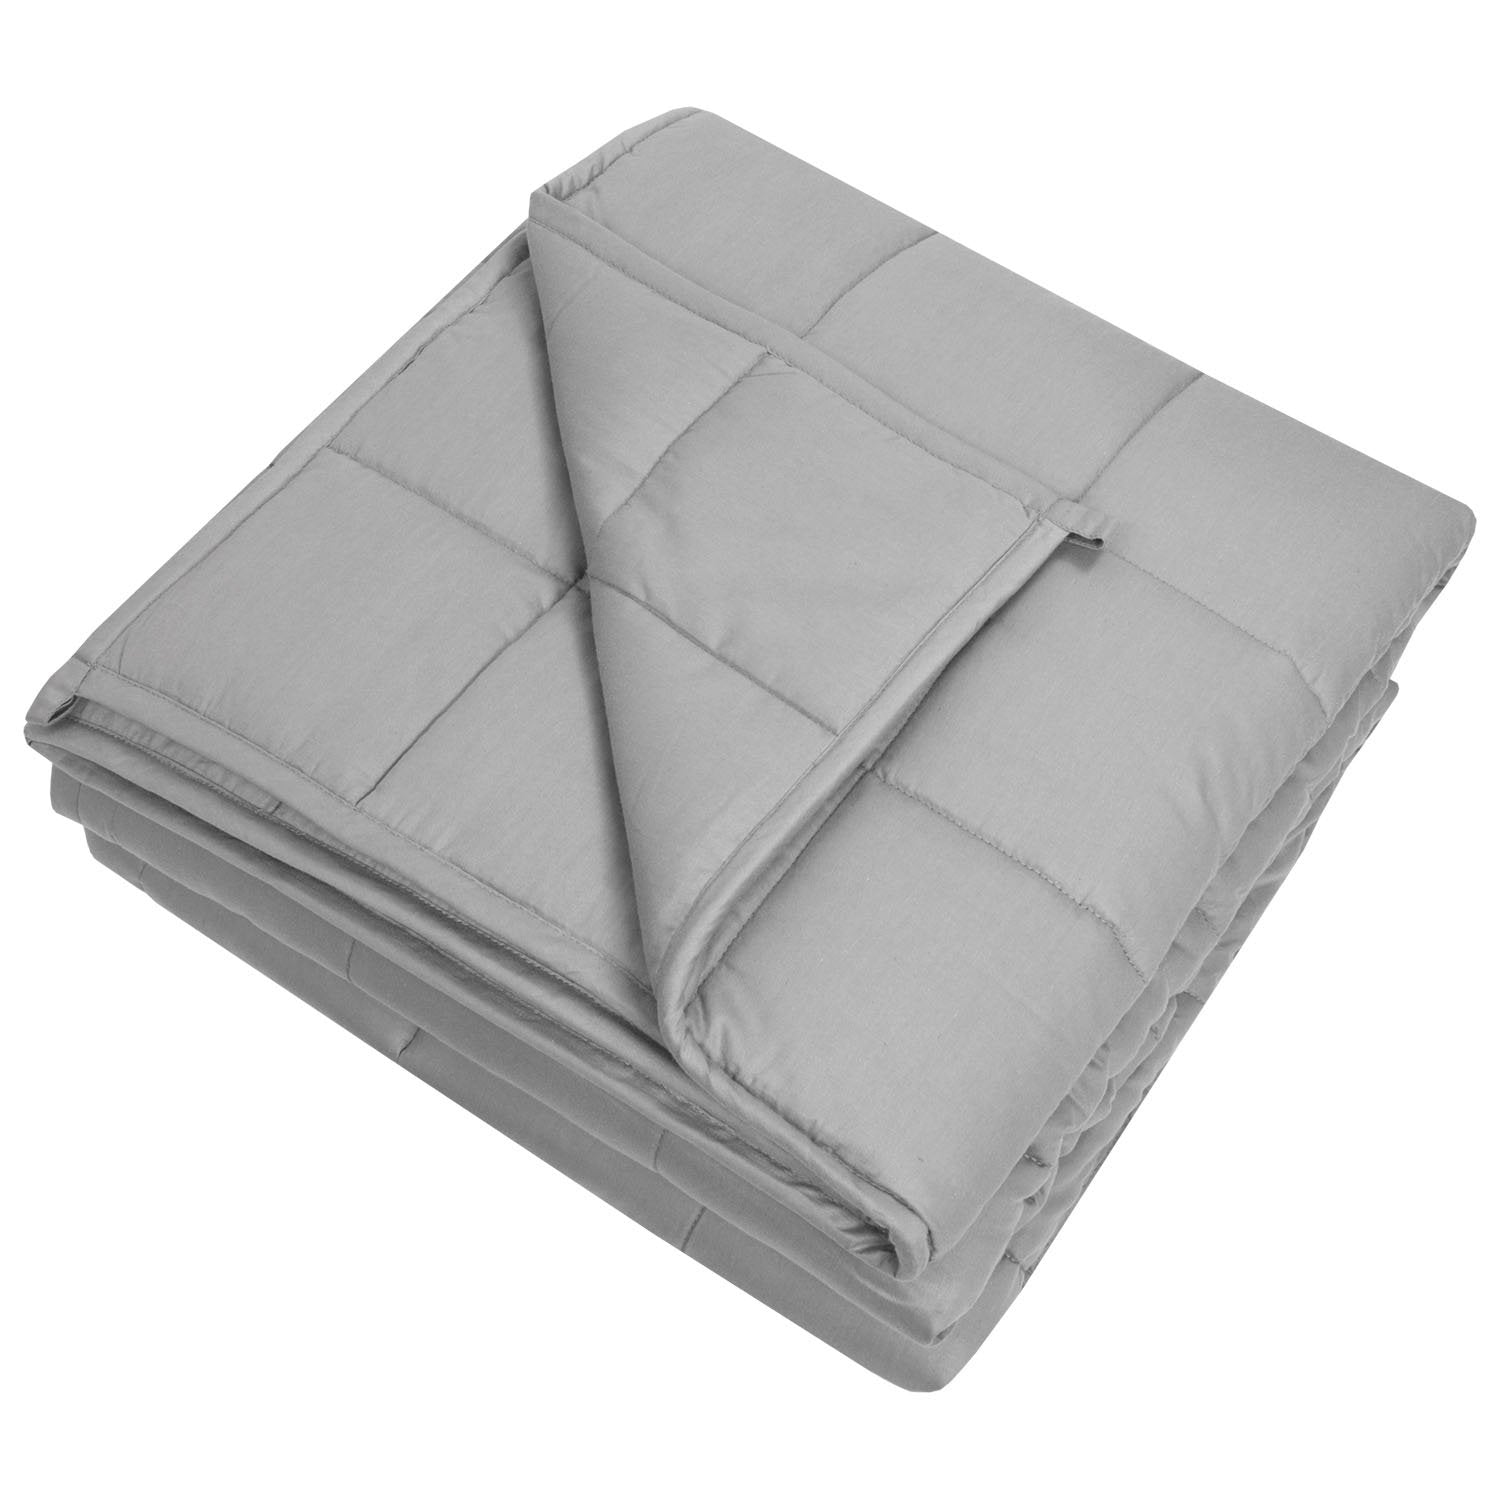 Weighted Blanket Light Gray - Folded